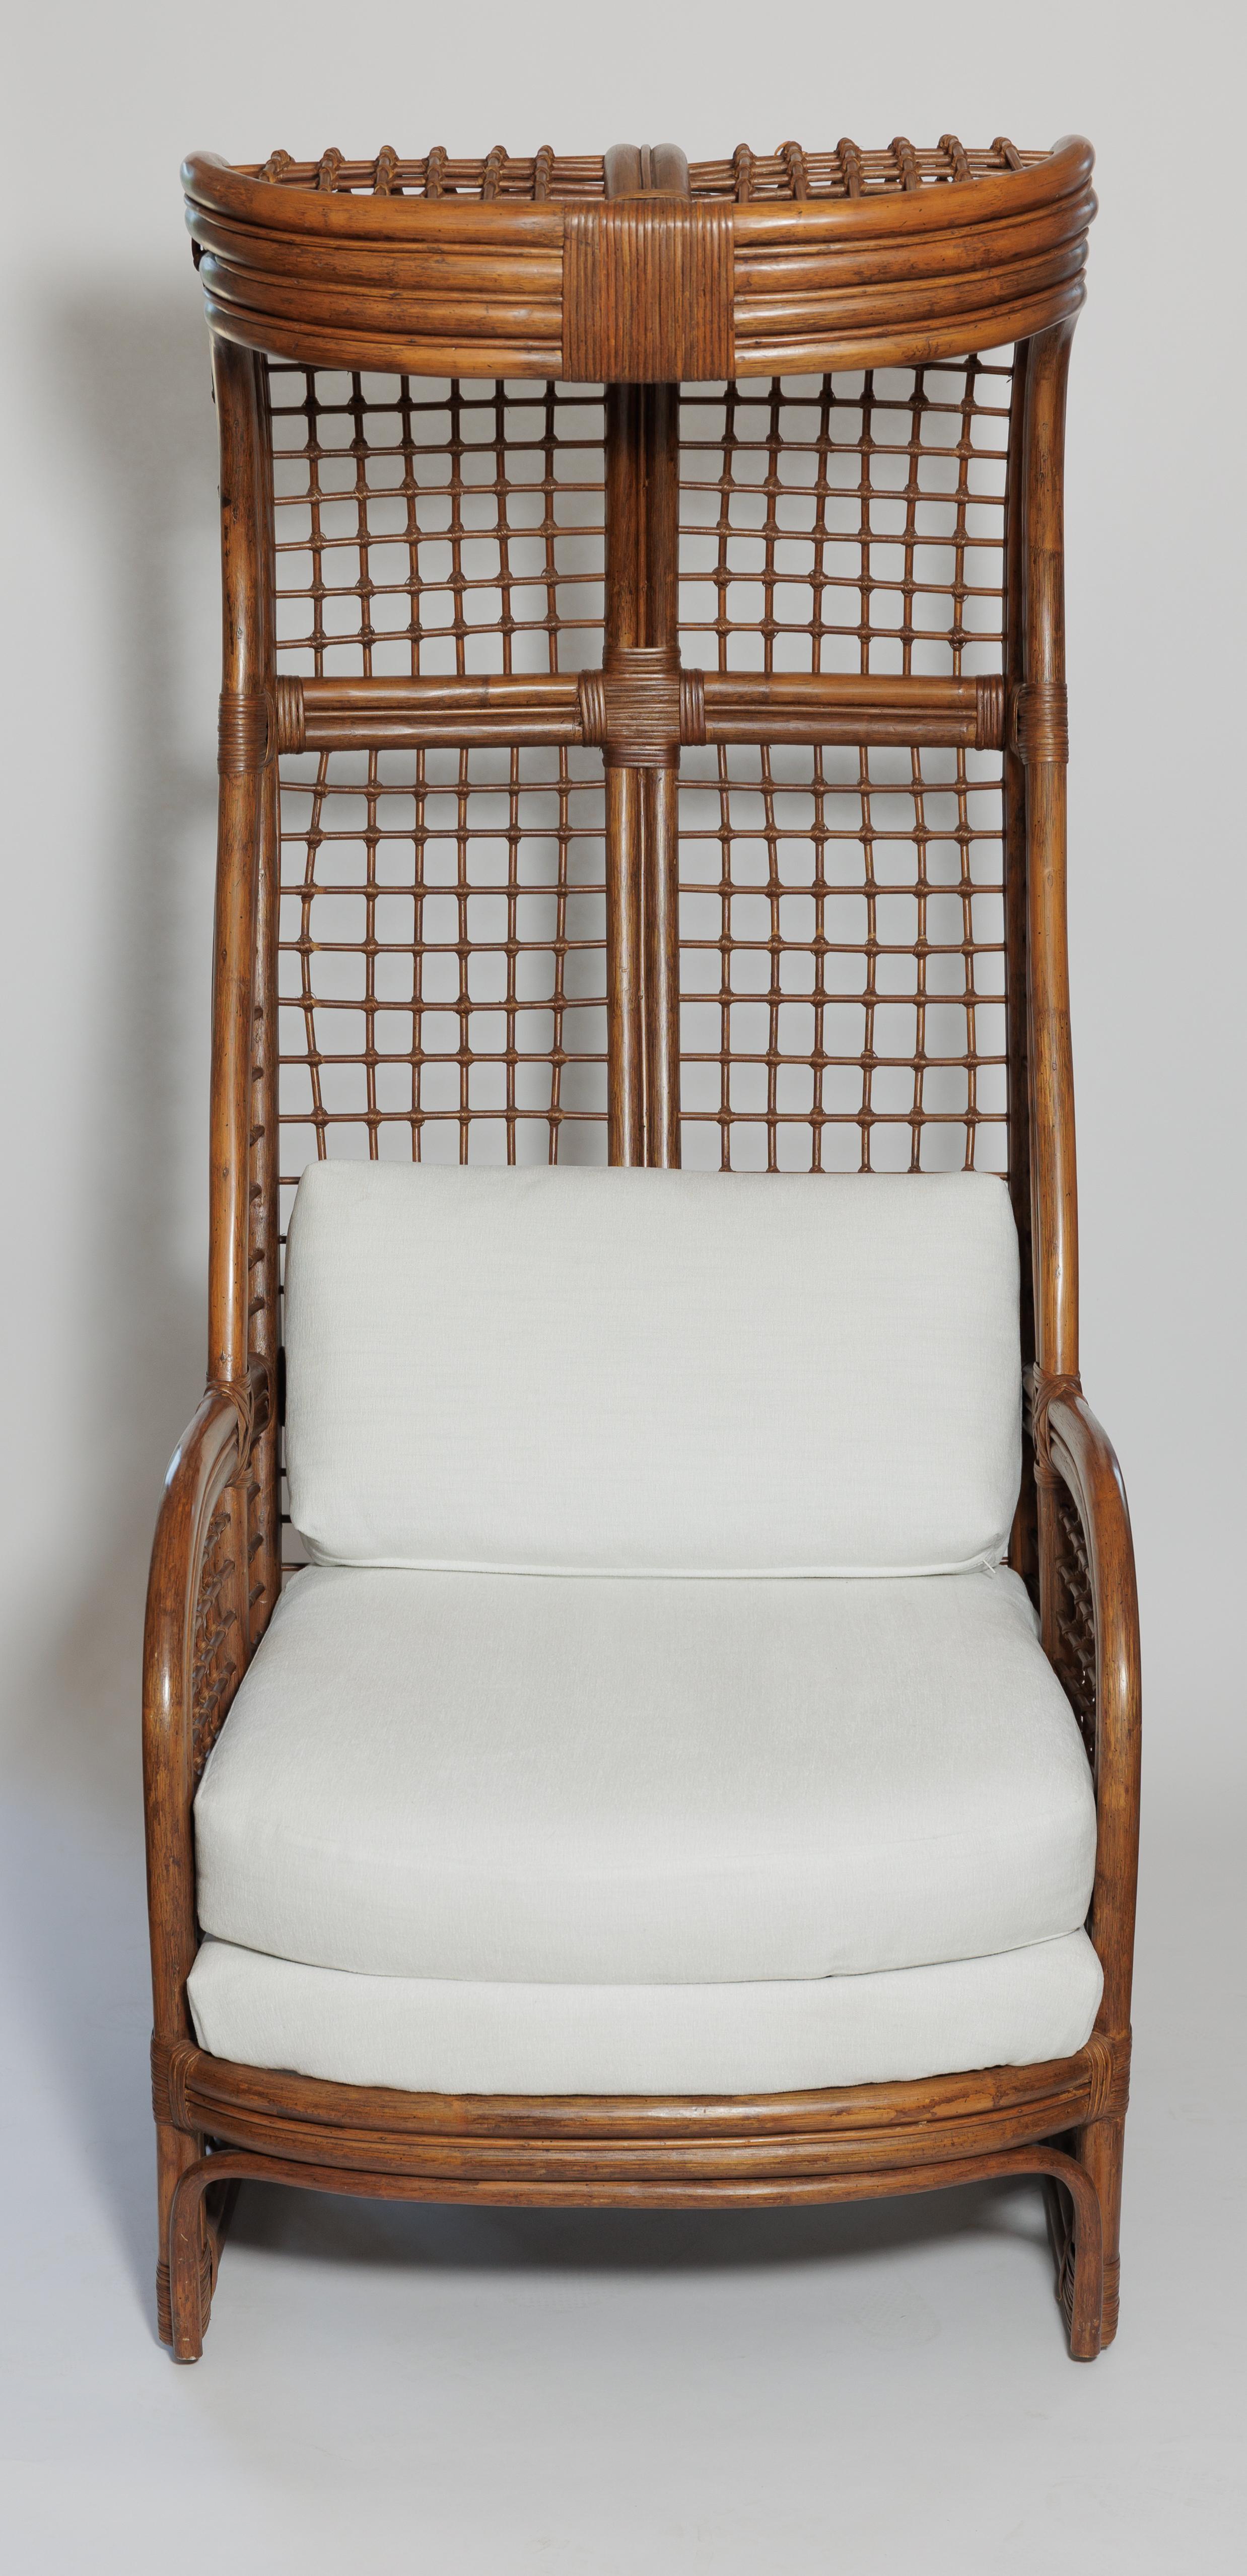 A statement pair of rattan chairs with canopy and newly unholstered cushions.